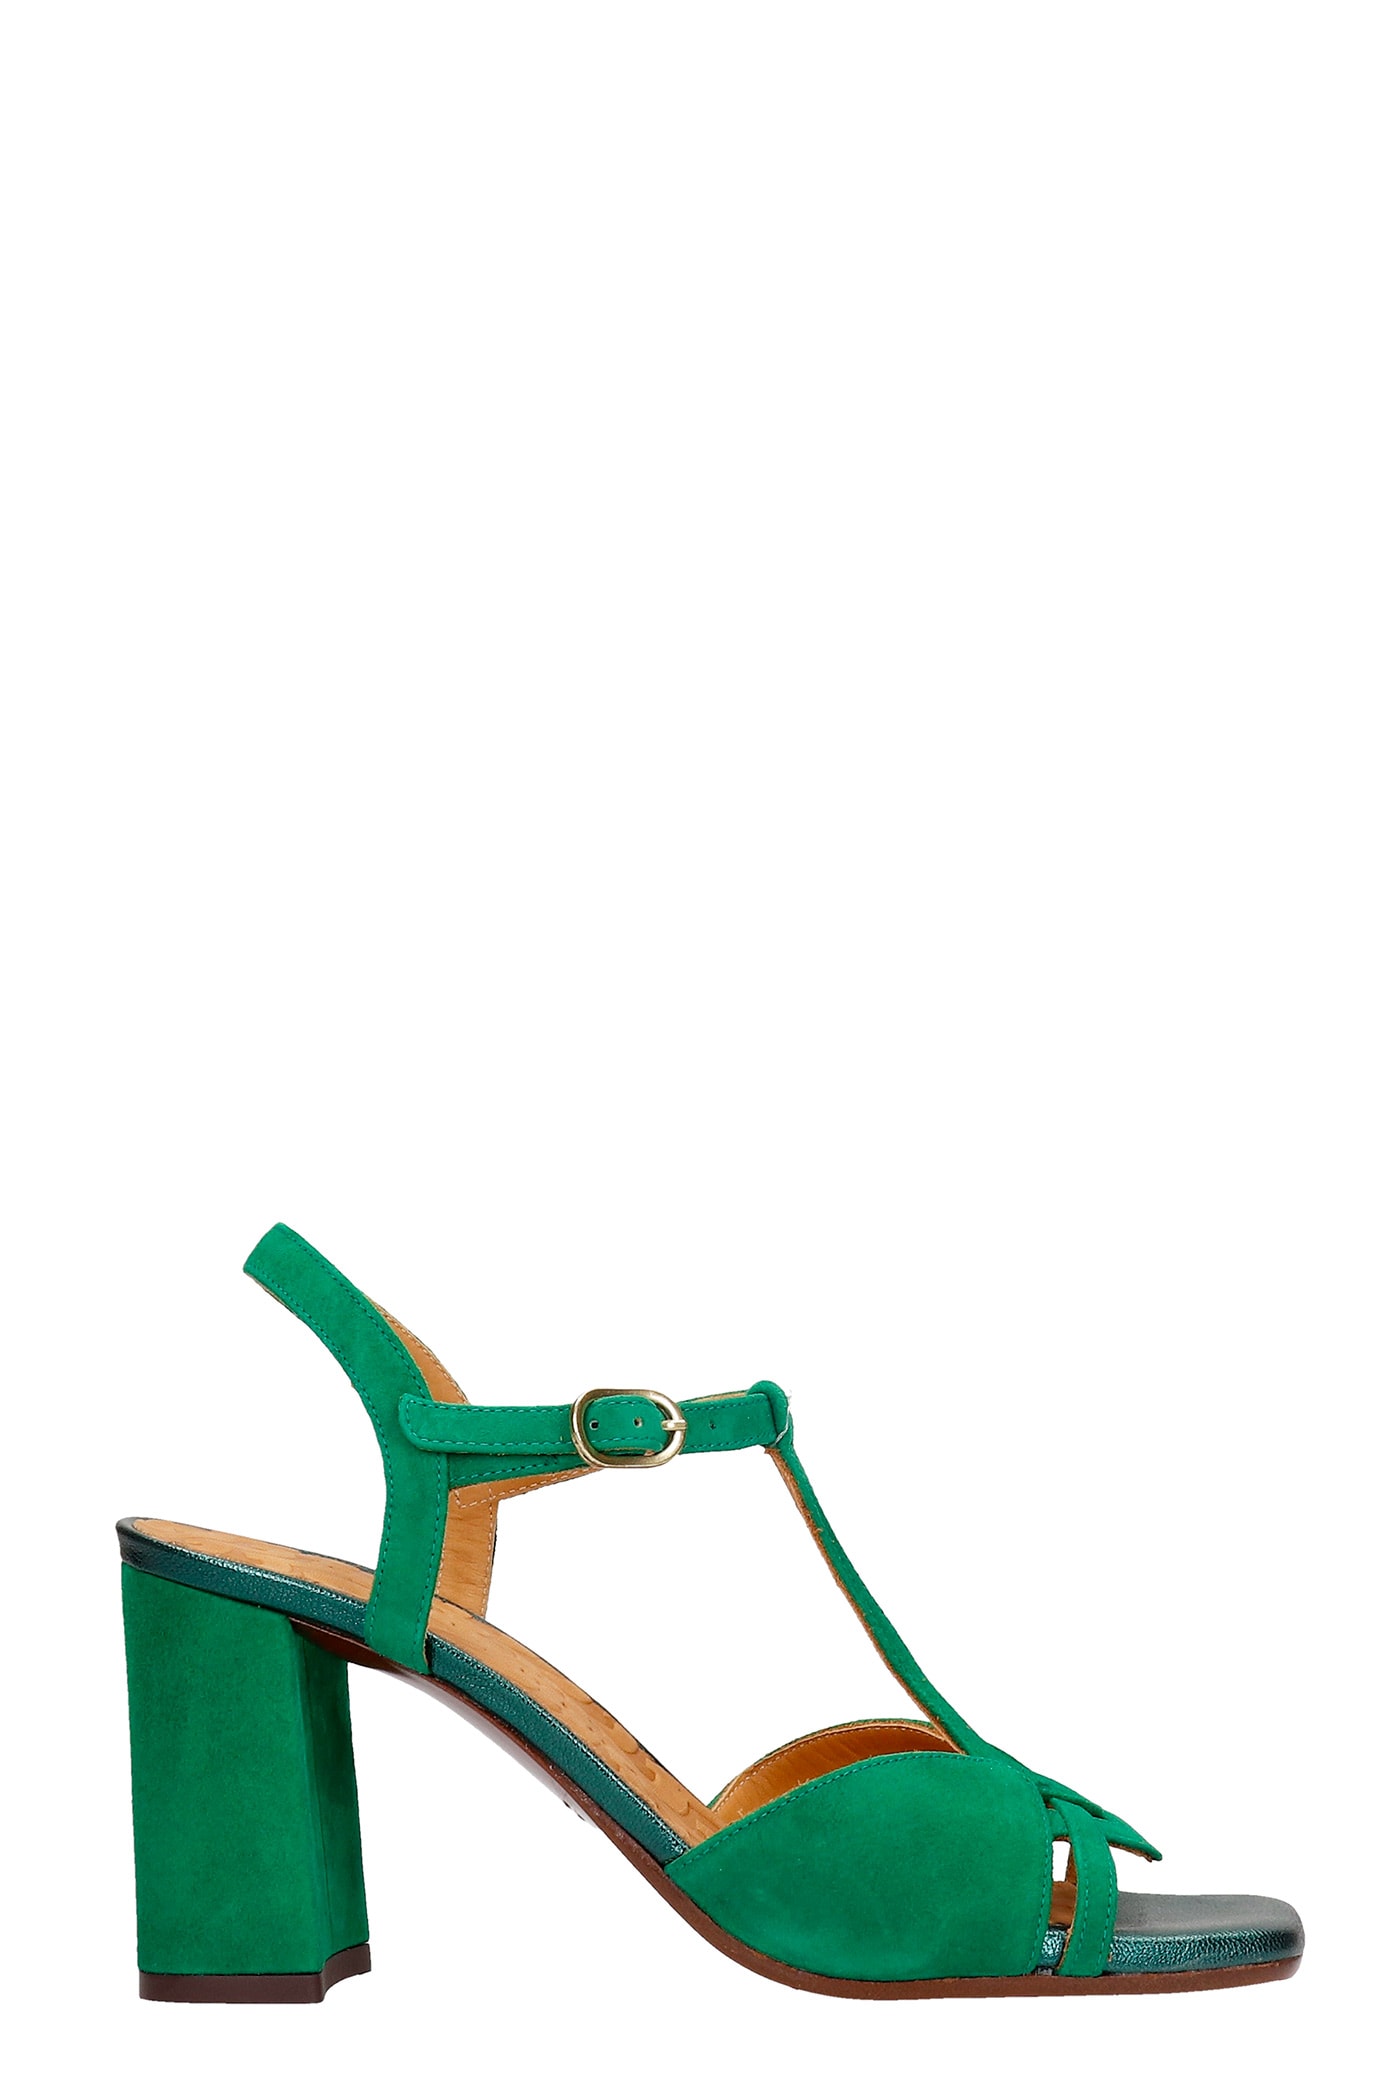 Chie Mihara ZIZI SANDALS IN GREEN SUEDE